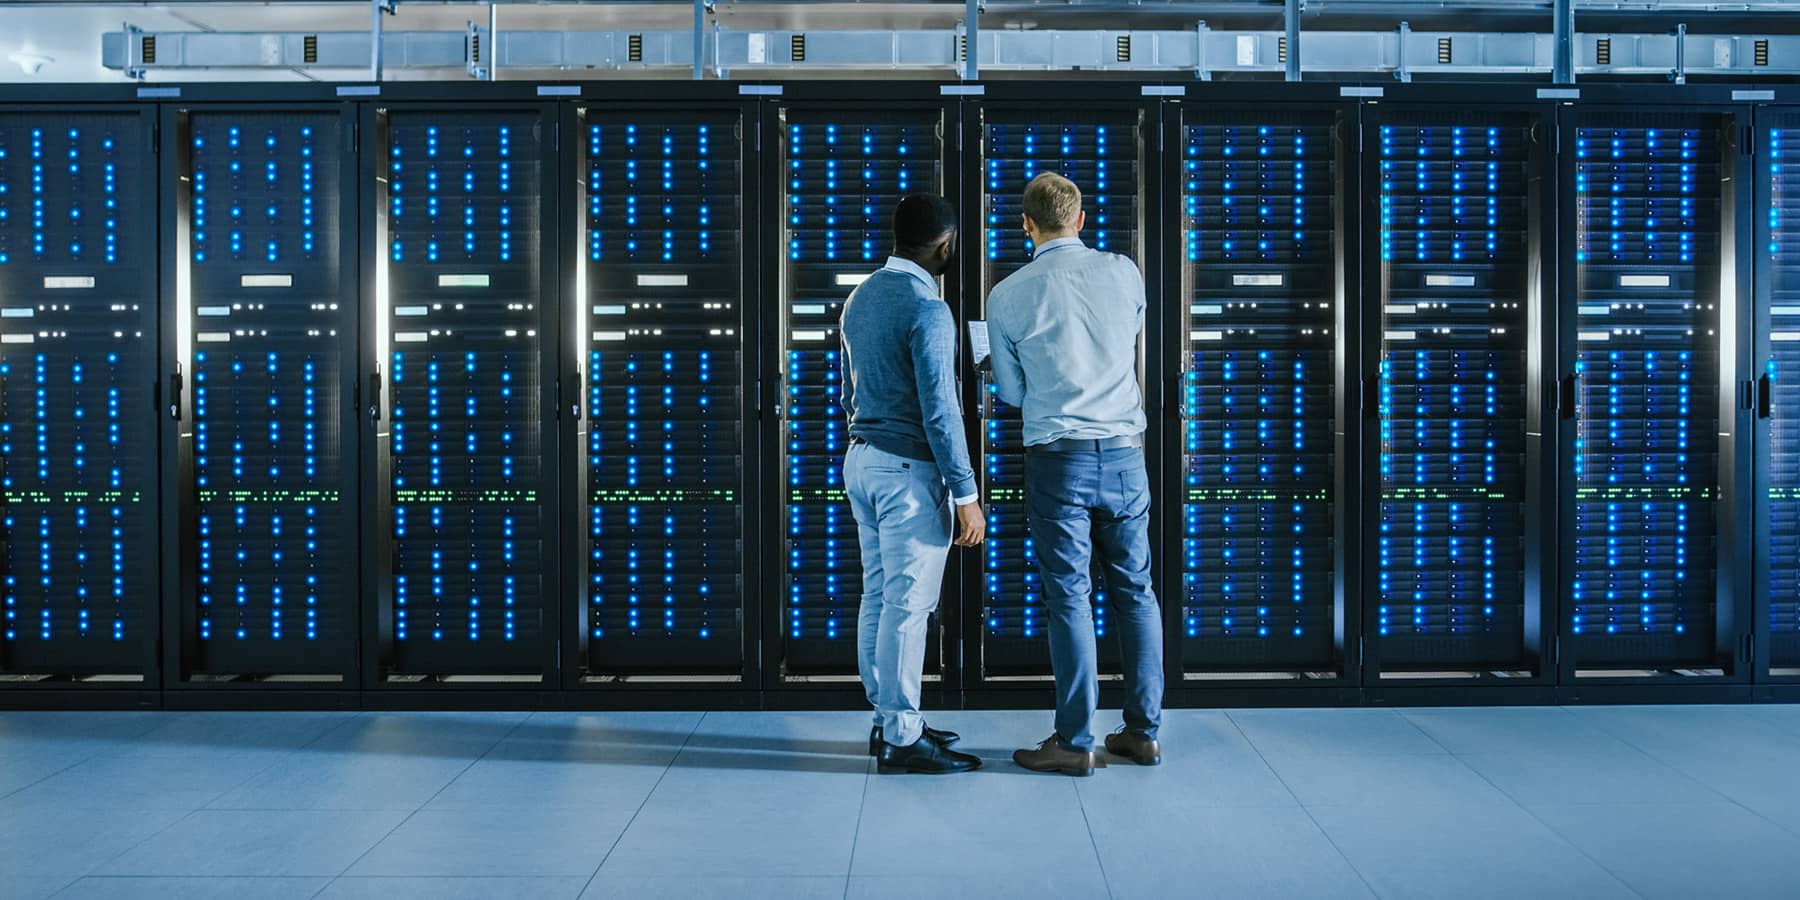 Two people examining a server rack